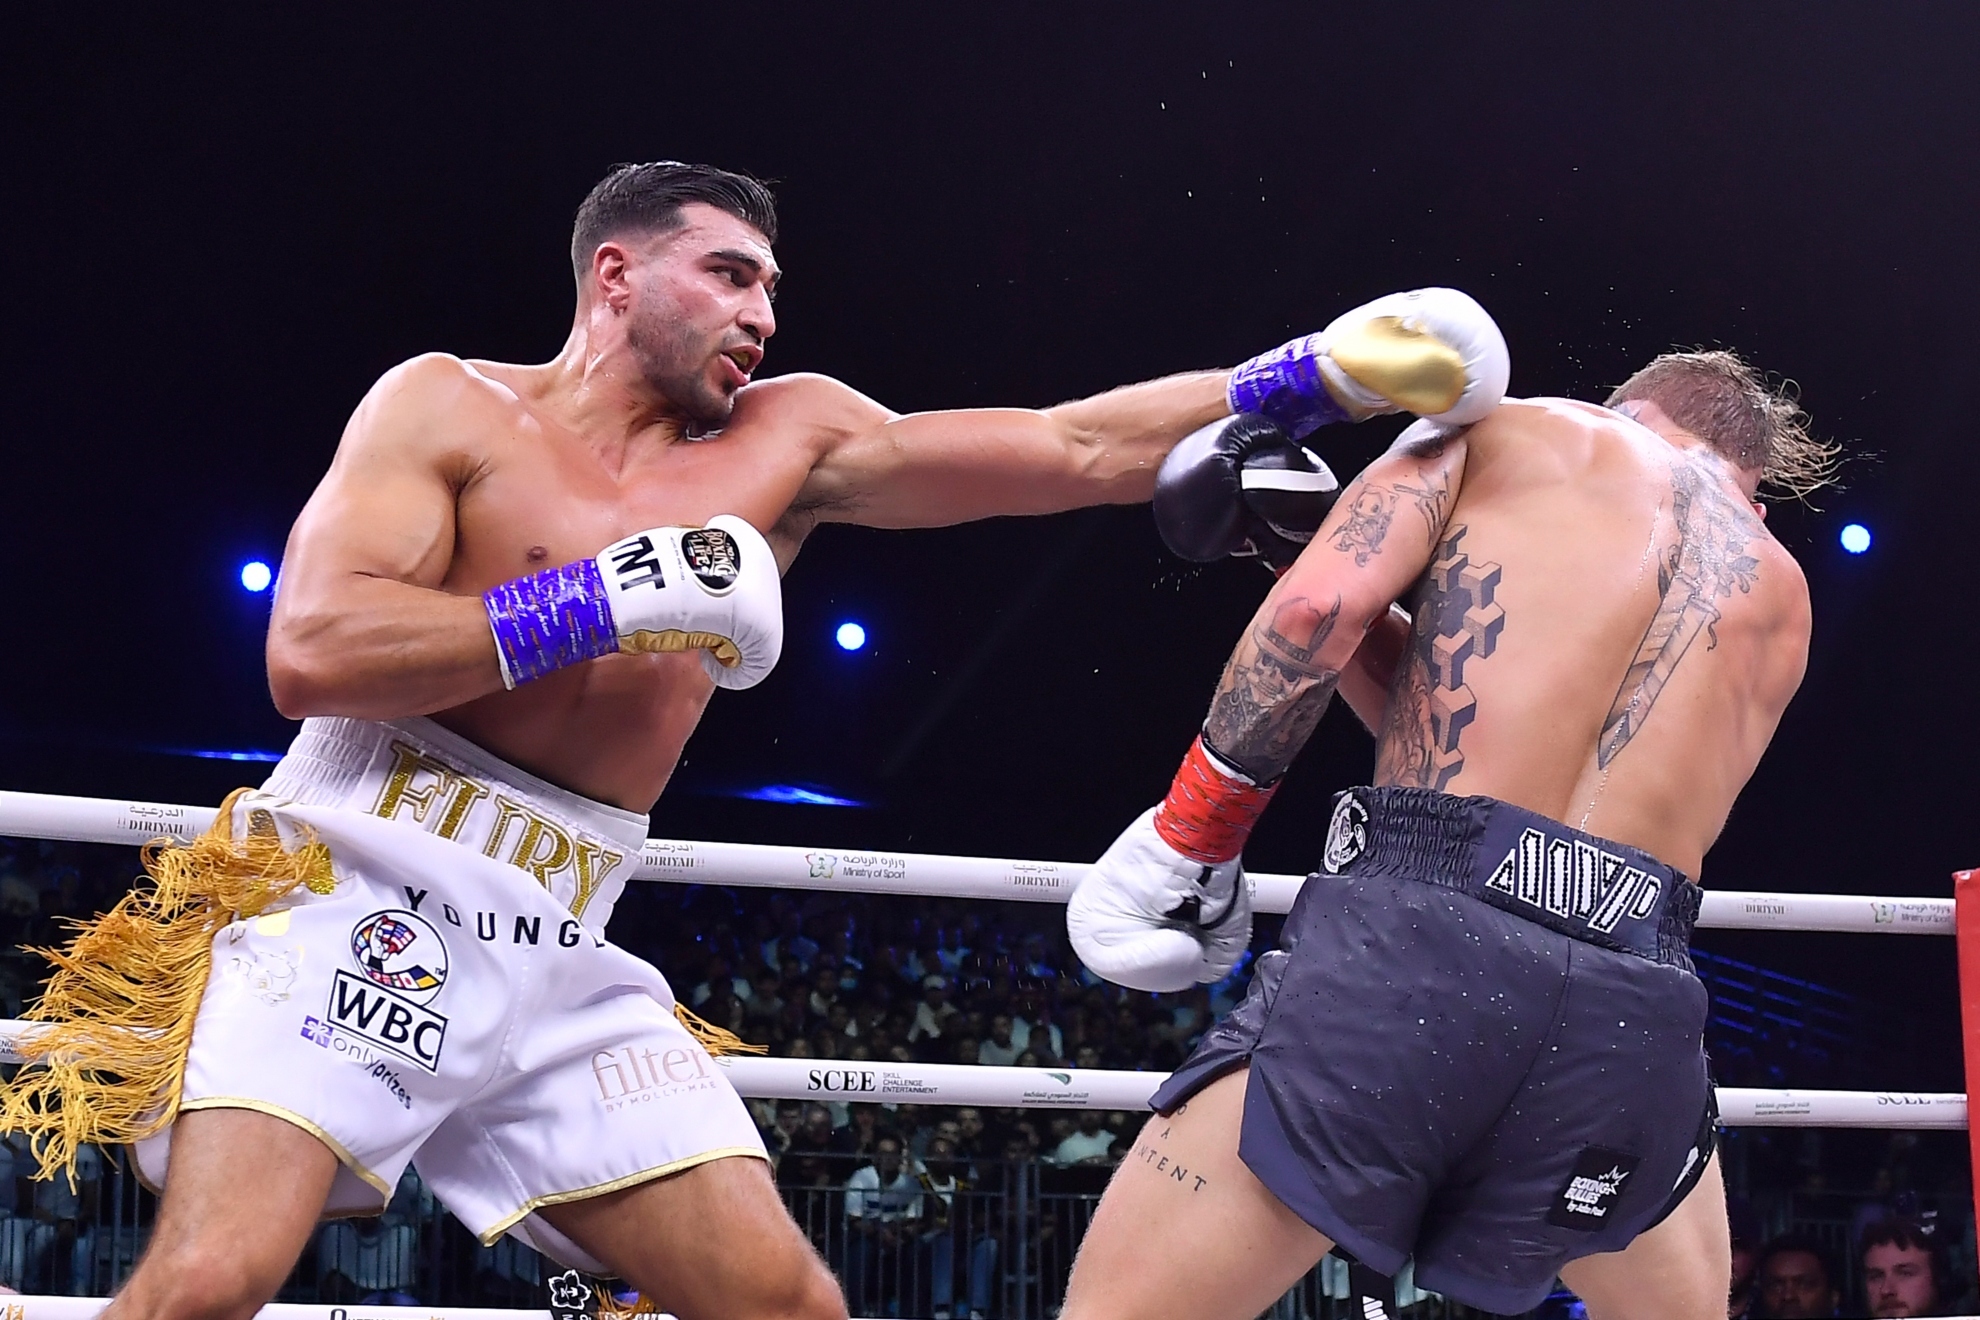 Rematch in limbo: Tommy Fury points finger at Jake Paul for delay